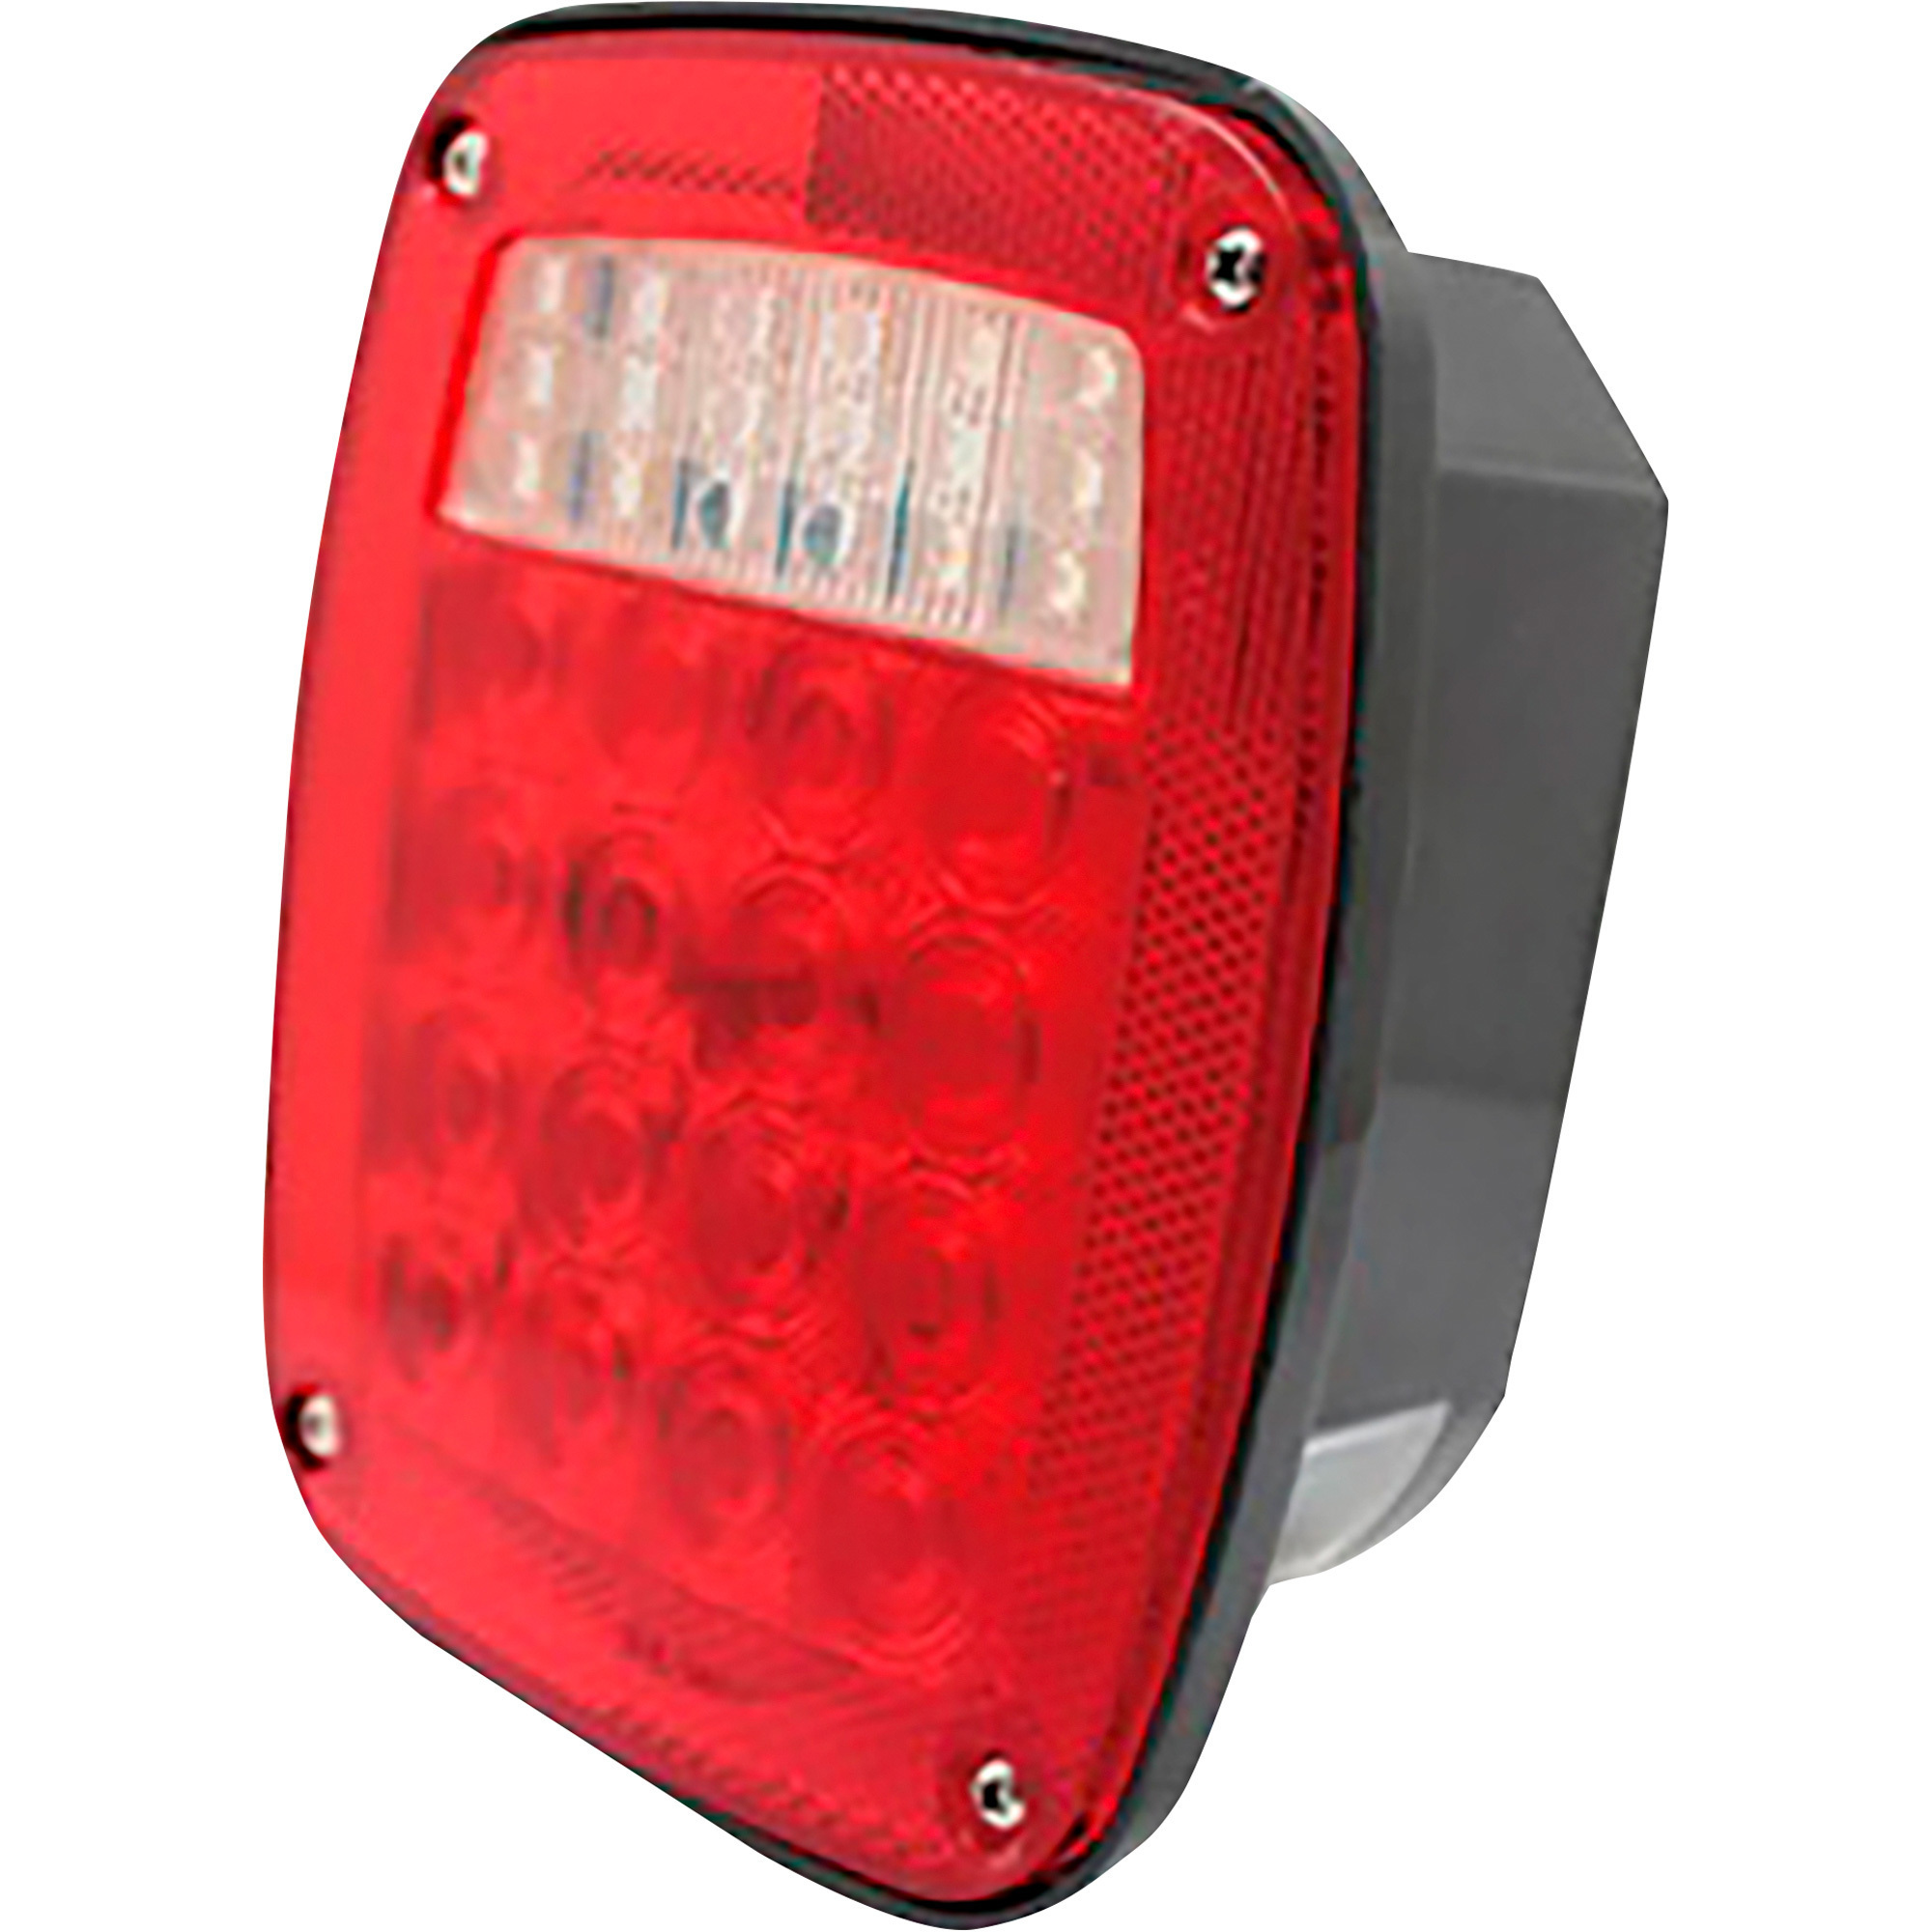 Uriah Products 12 Volt Stop/Tail/Turn Universal LED Trailer/Truck Light â With Backup Light, Model UL445100